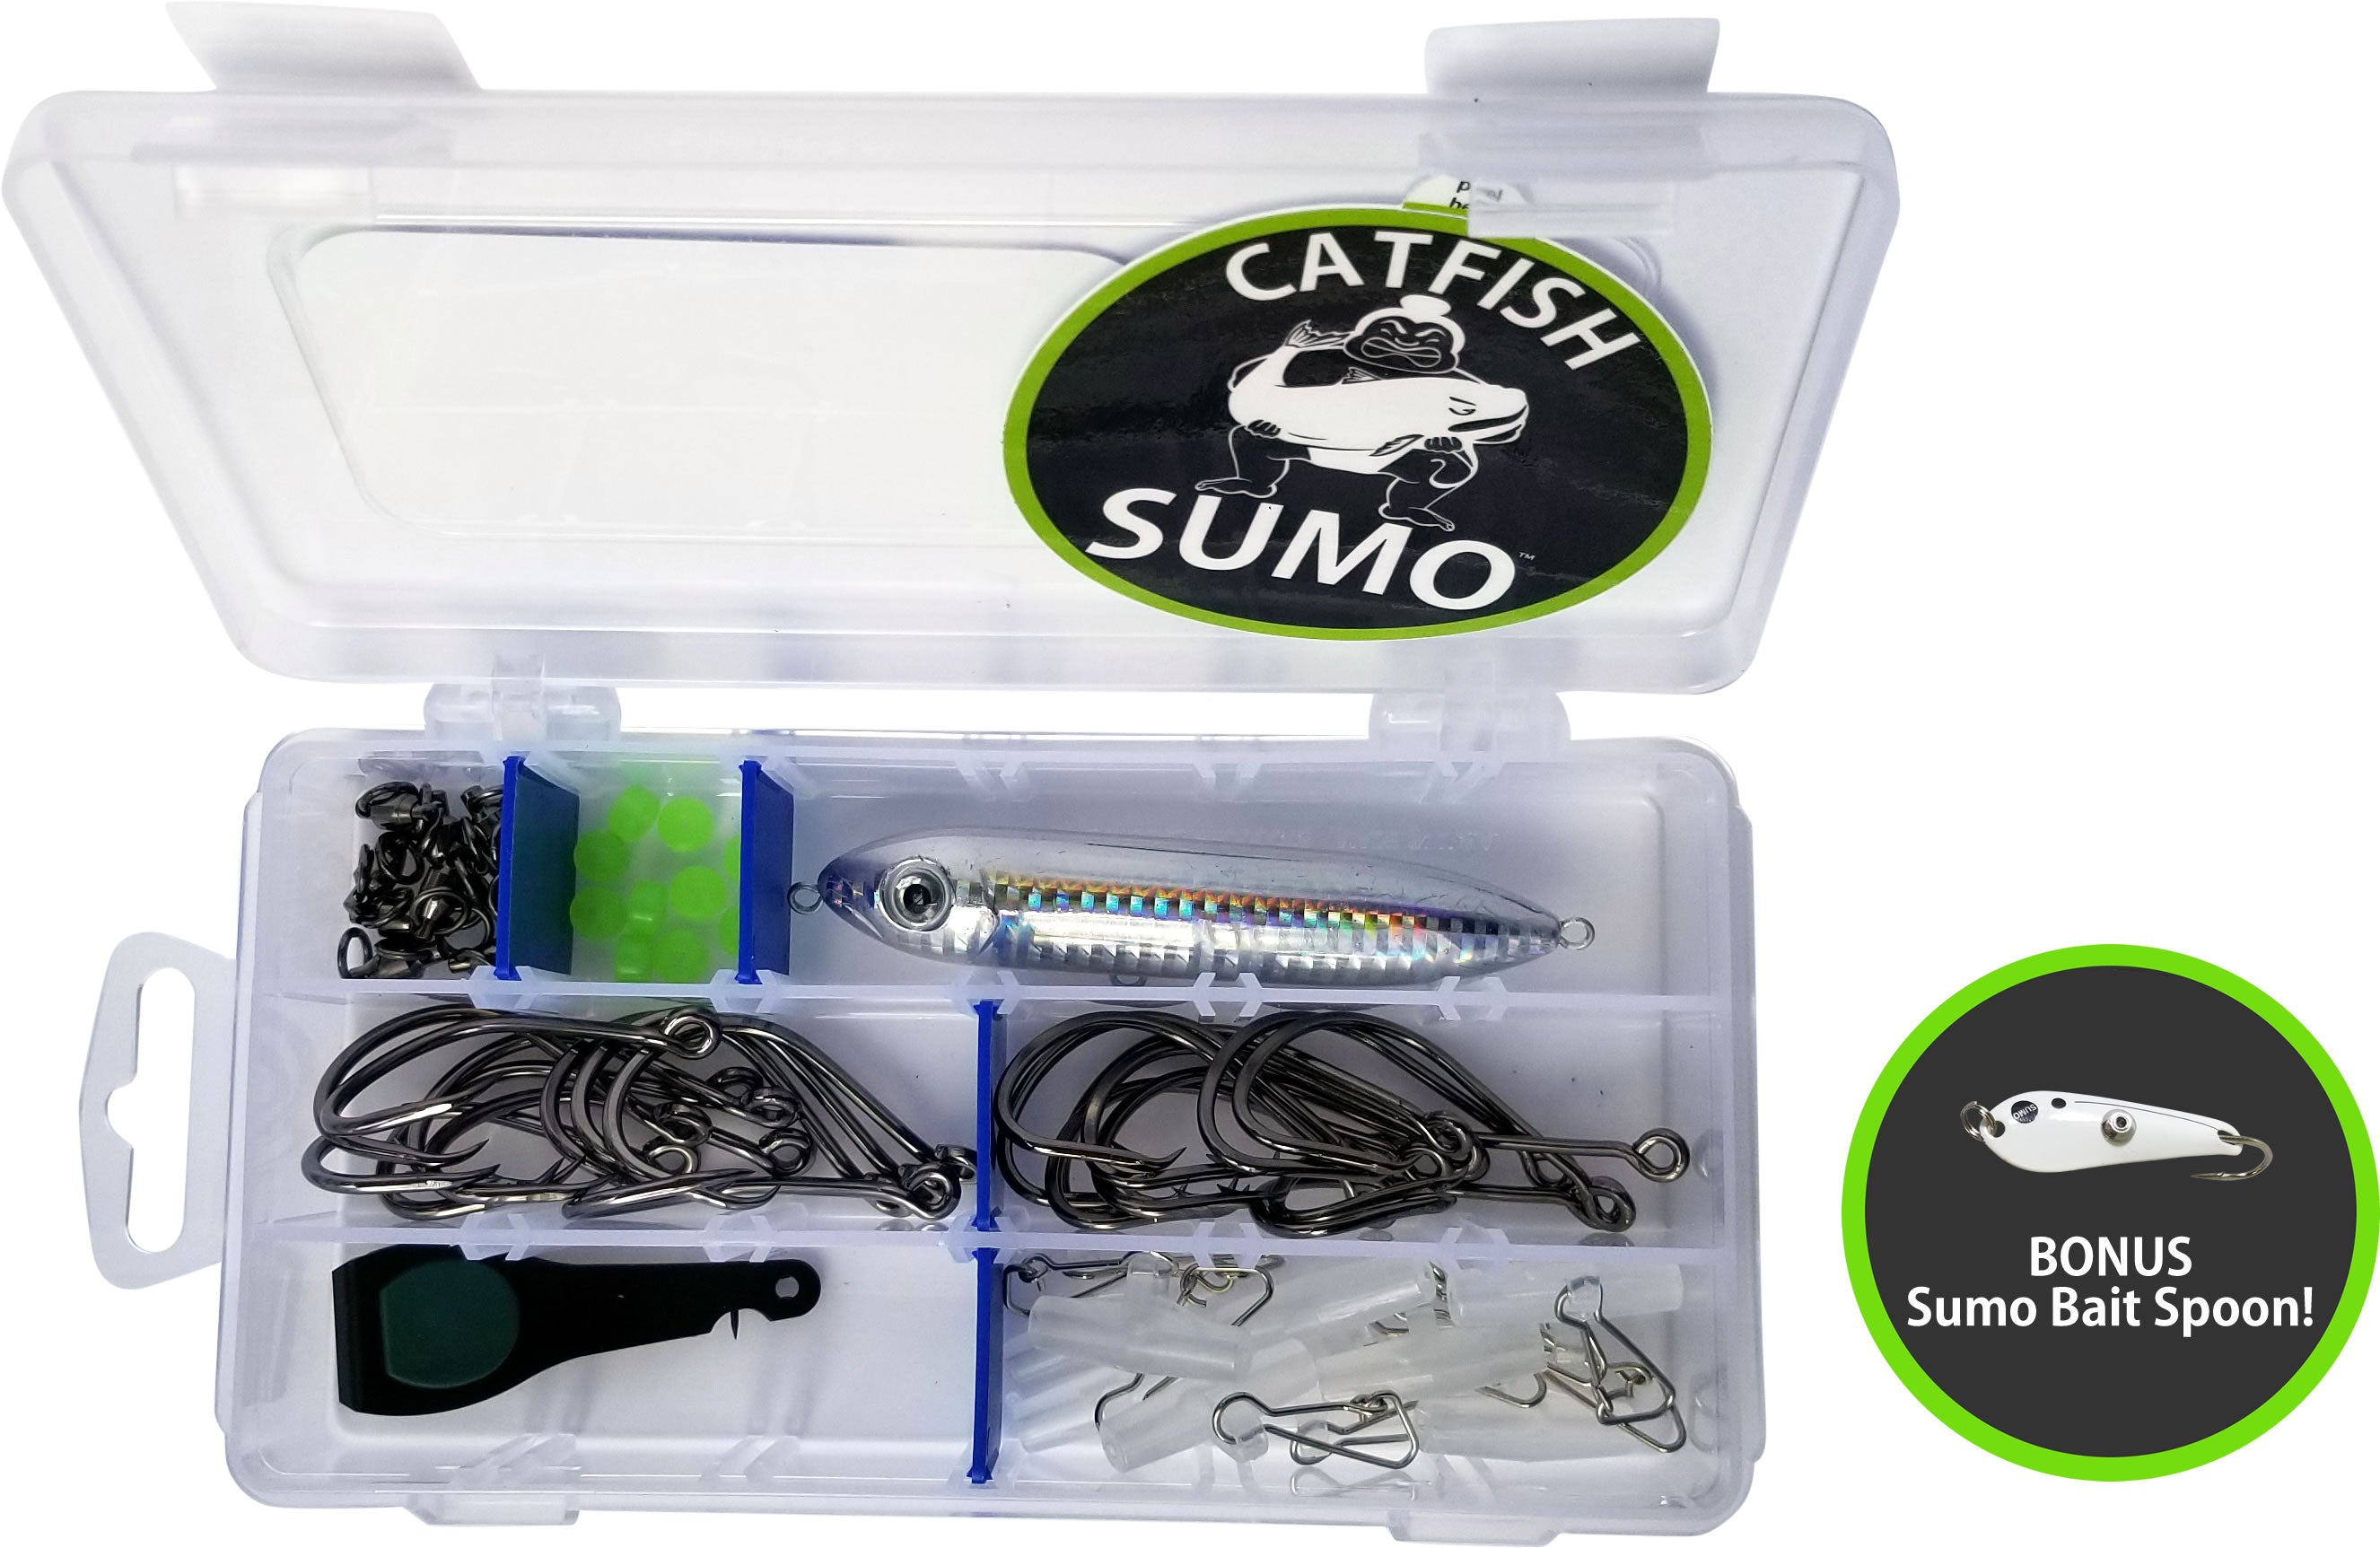 Complete Trophy Catfishing Starter Kit - 55 Pieces for Catching Your First Trophy Catfish